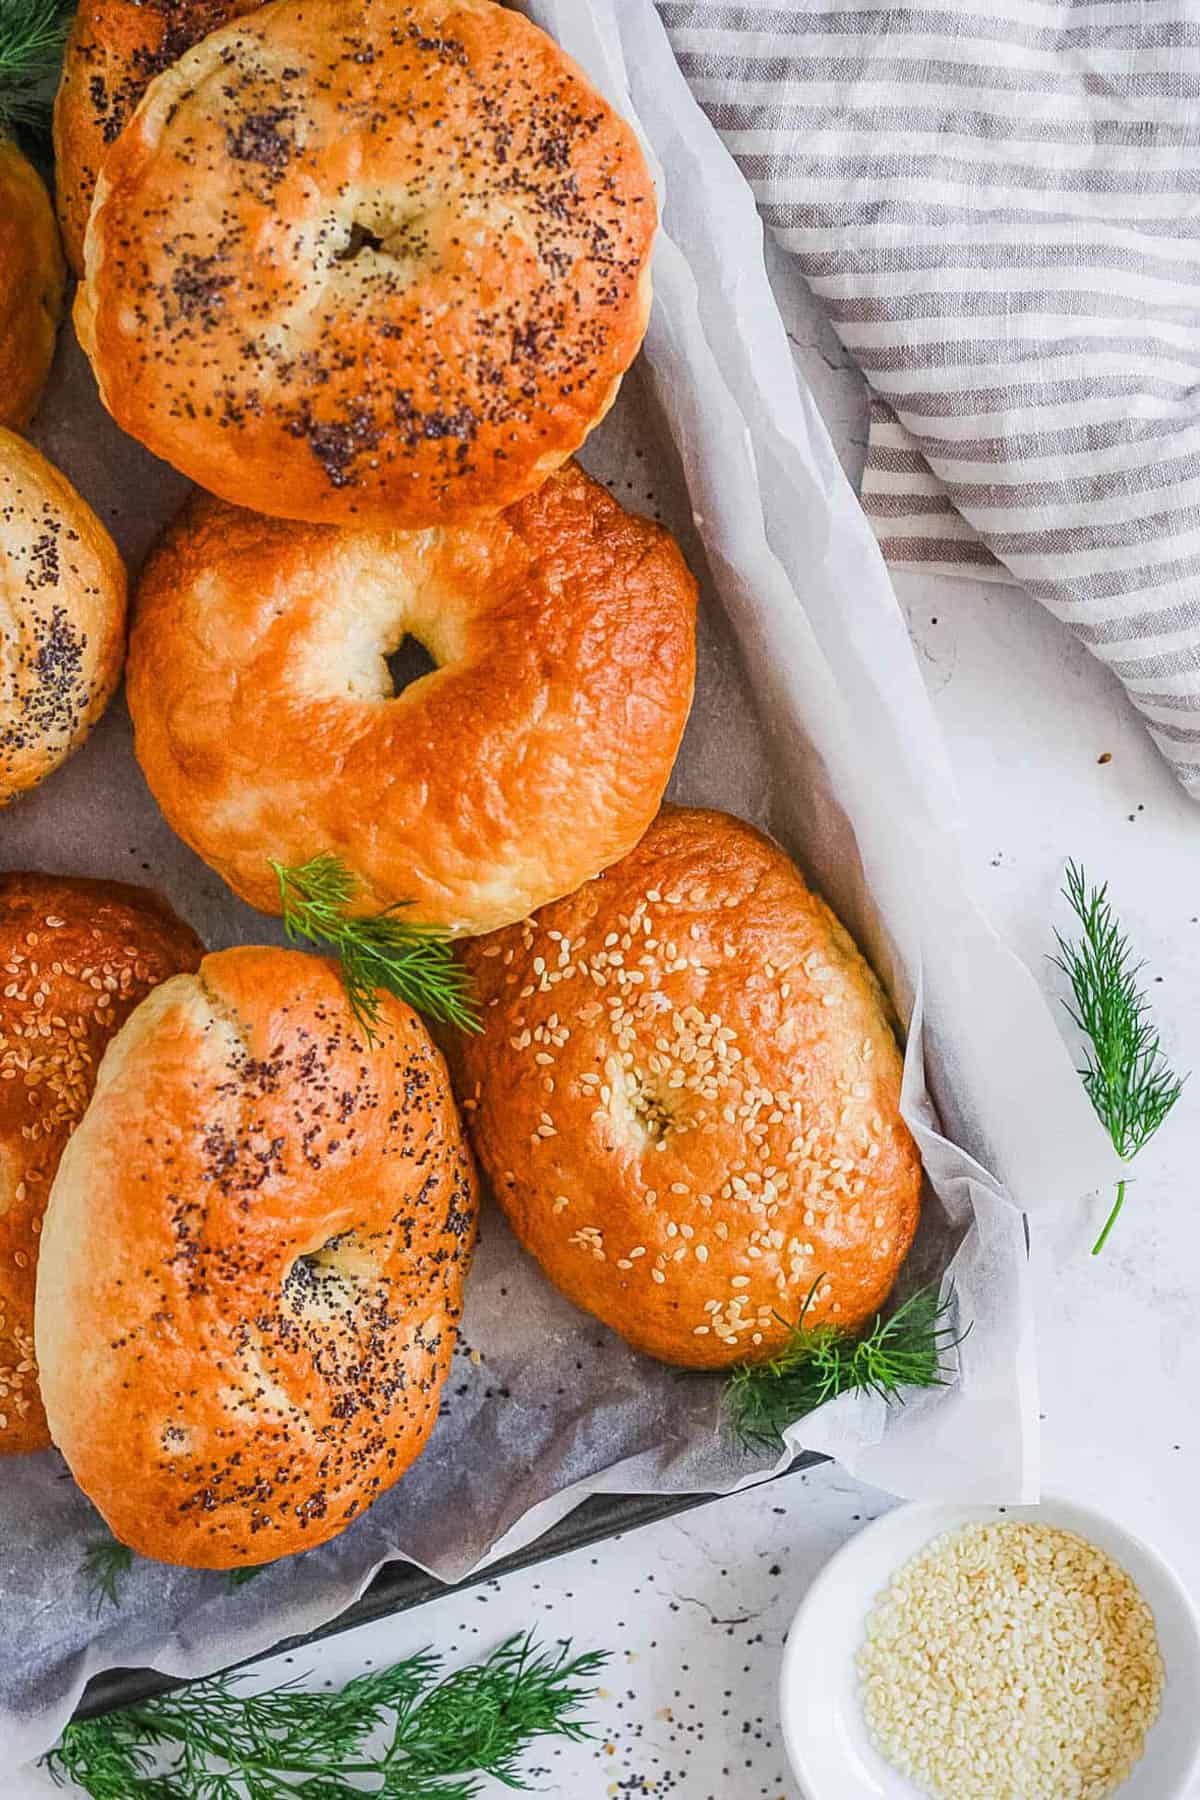 Vegan bagels served on a white tray.